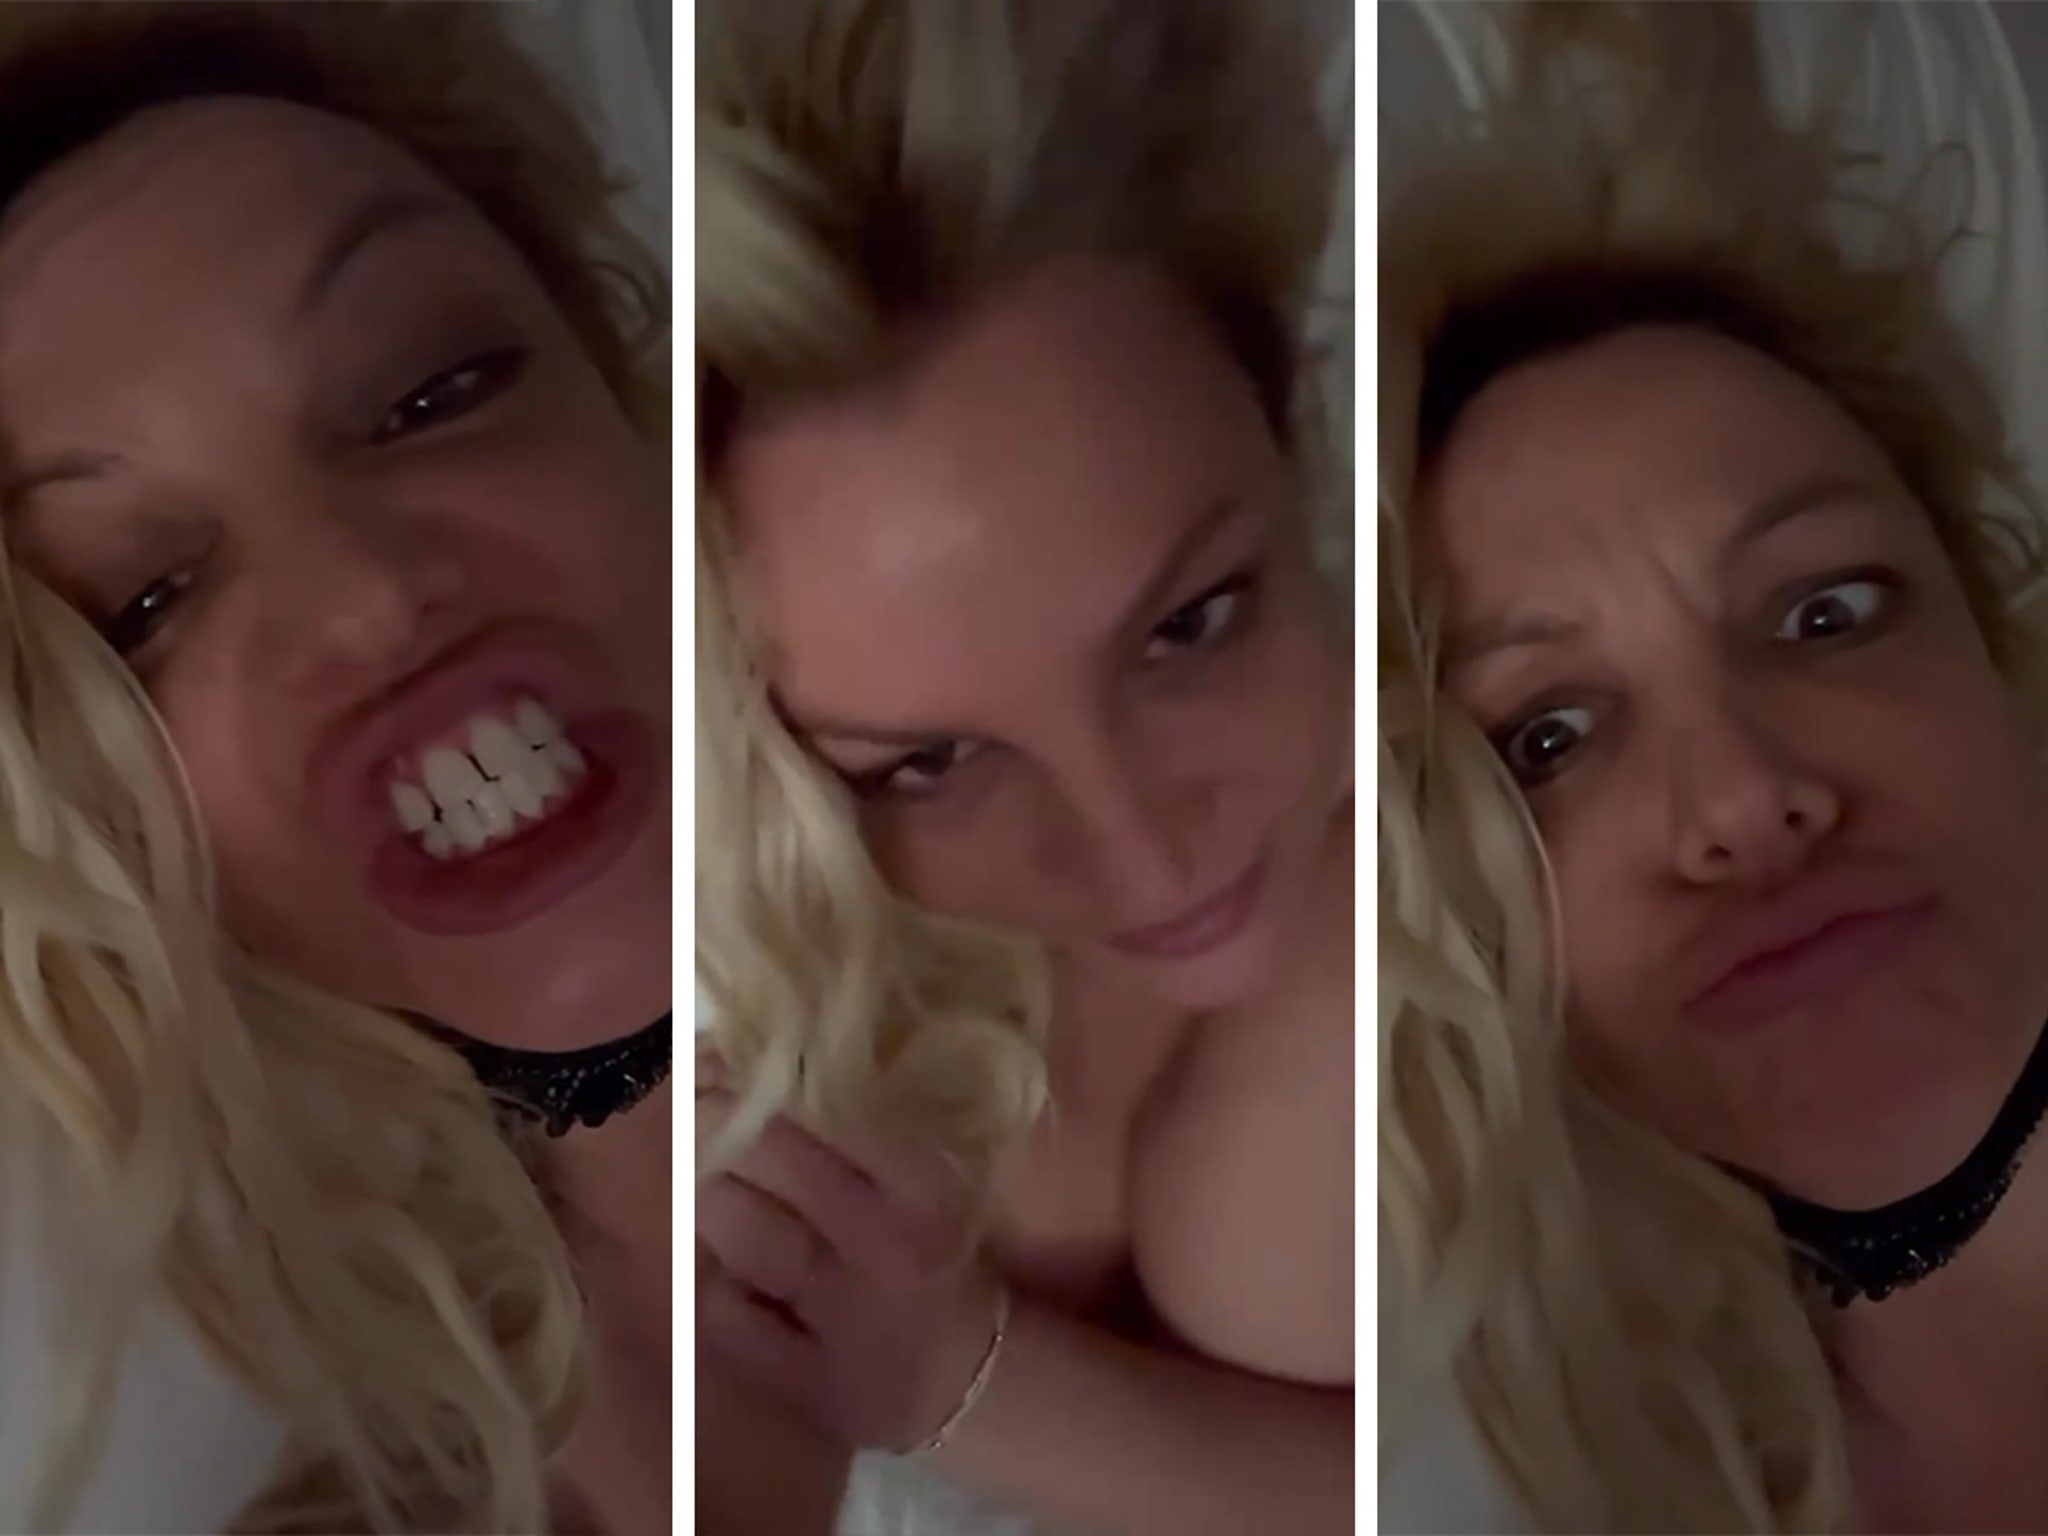 Britney Spears Makes Fish-Like Faces, Flaunts Breasts in New